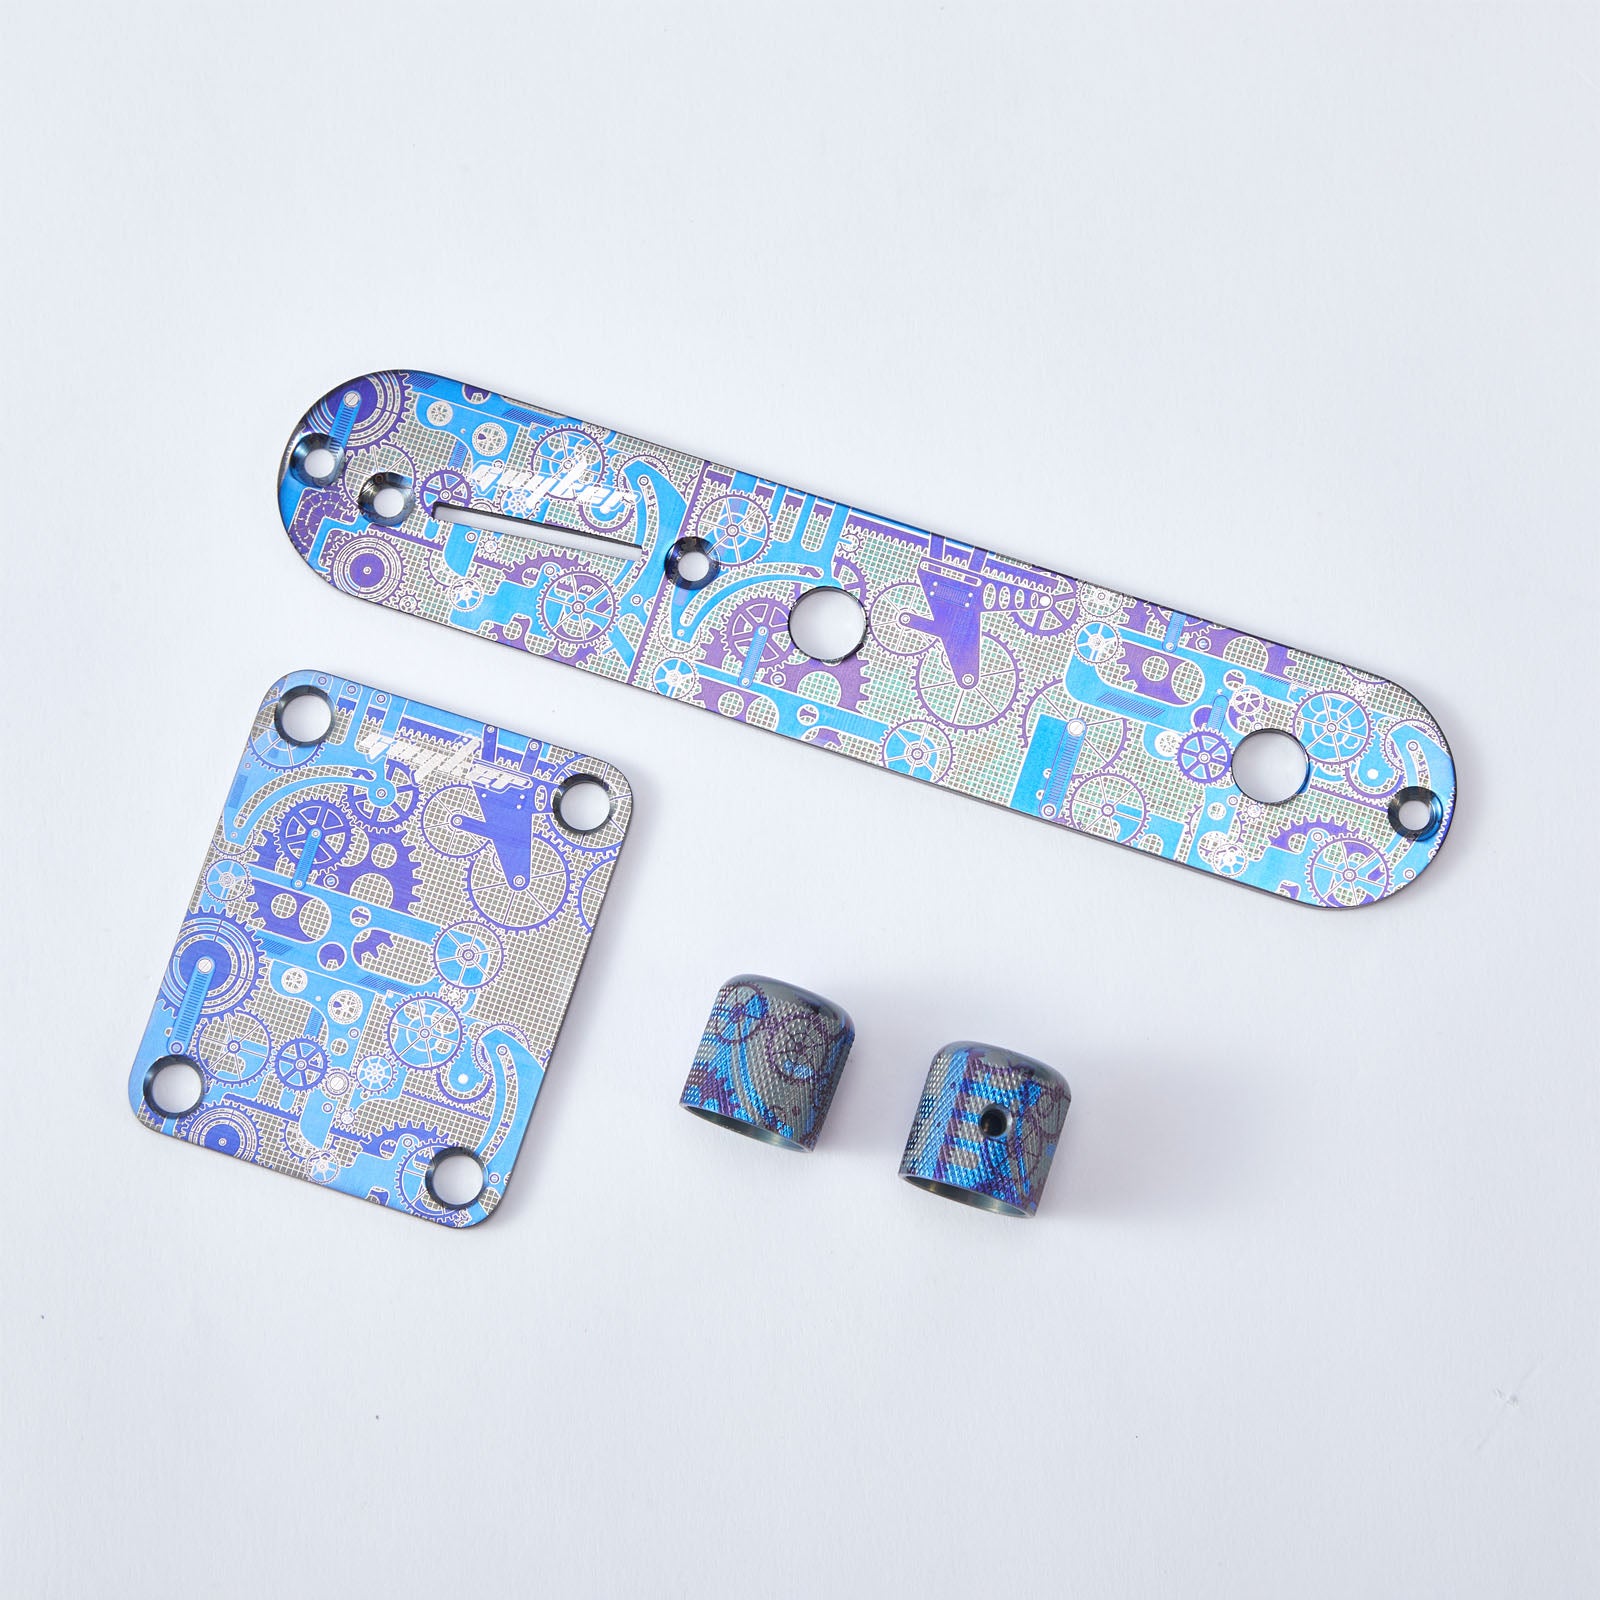 NS005-TI-Titanium Alloy Control Plate Knob Mechanical Pattern for Fend TL Parts Replacement